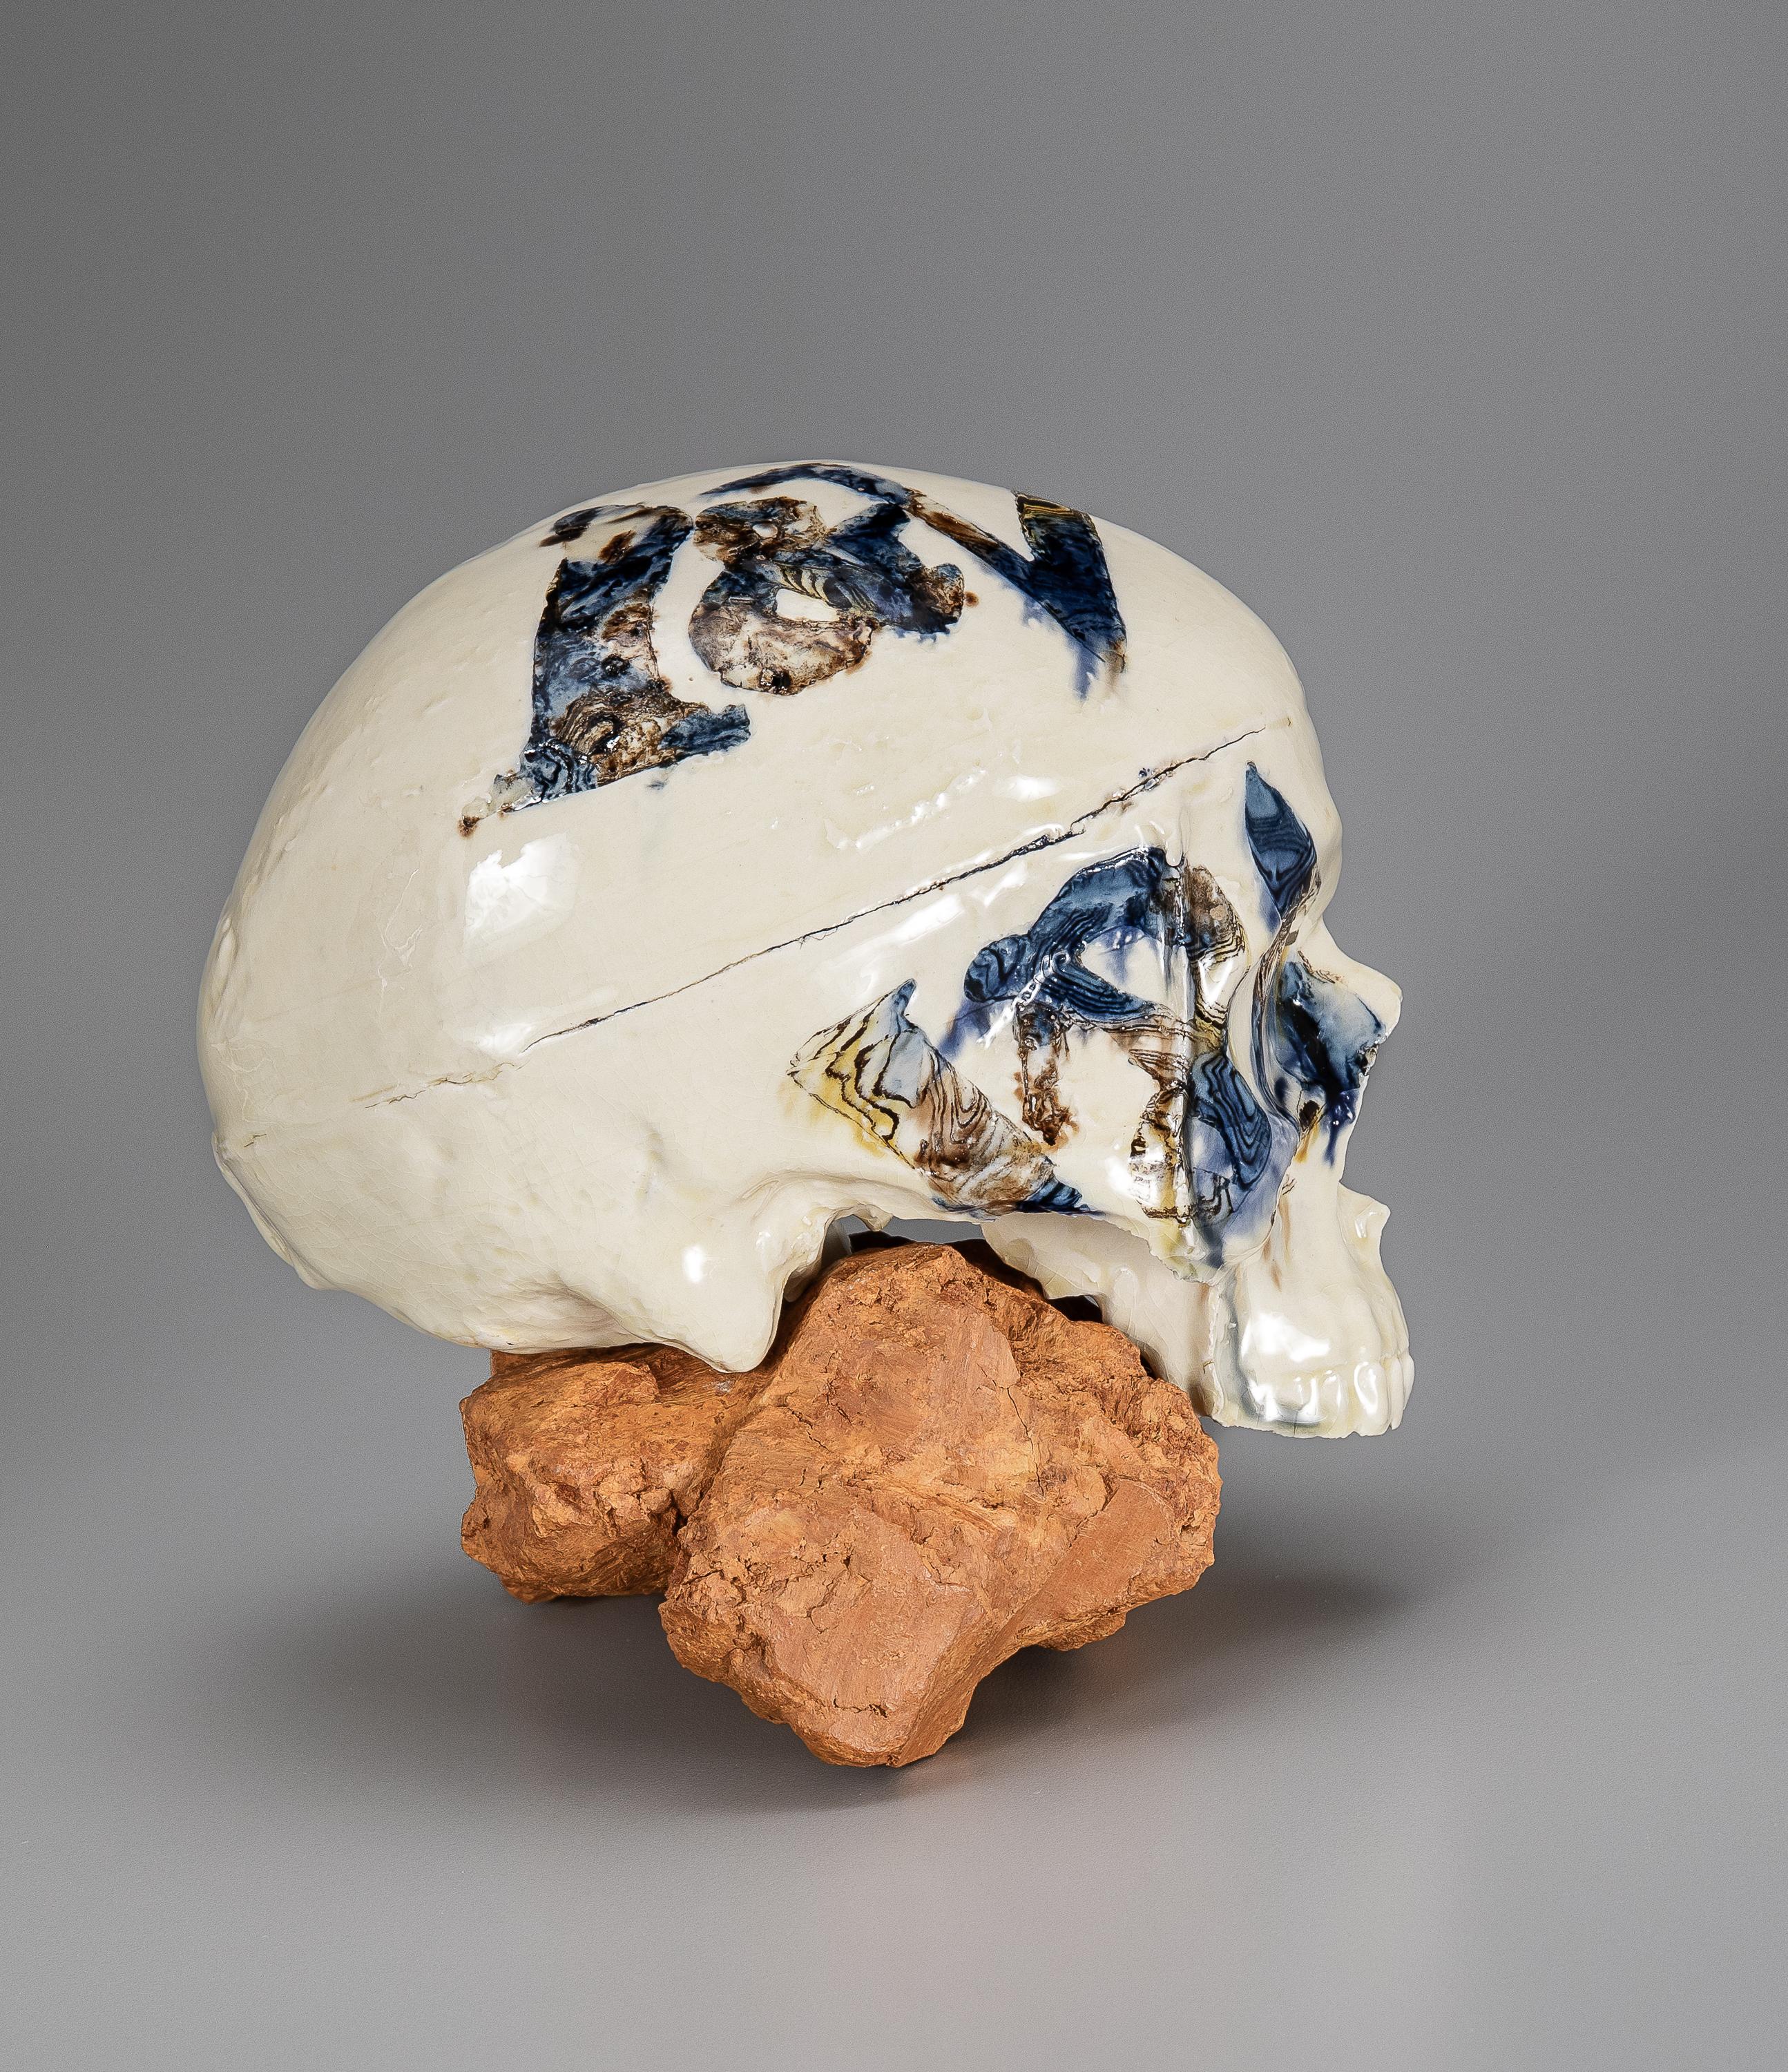 CREAMWARE SKULL 2012 V&A Residency as World Class Maker
H 7”
Press molded and slipcast creamware with metallic oxide agate and indigenous London clay.

Description
	This skull incorporates Erickson’s experimental archeology in recreating an 18th